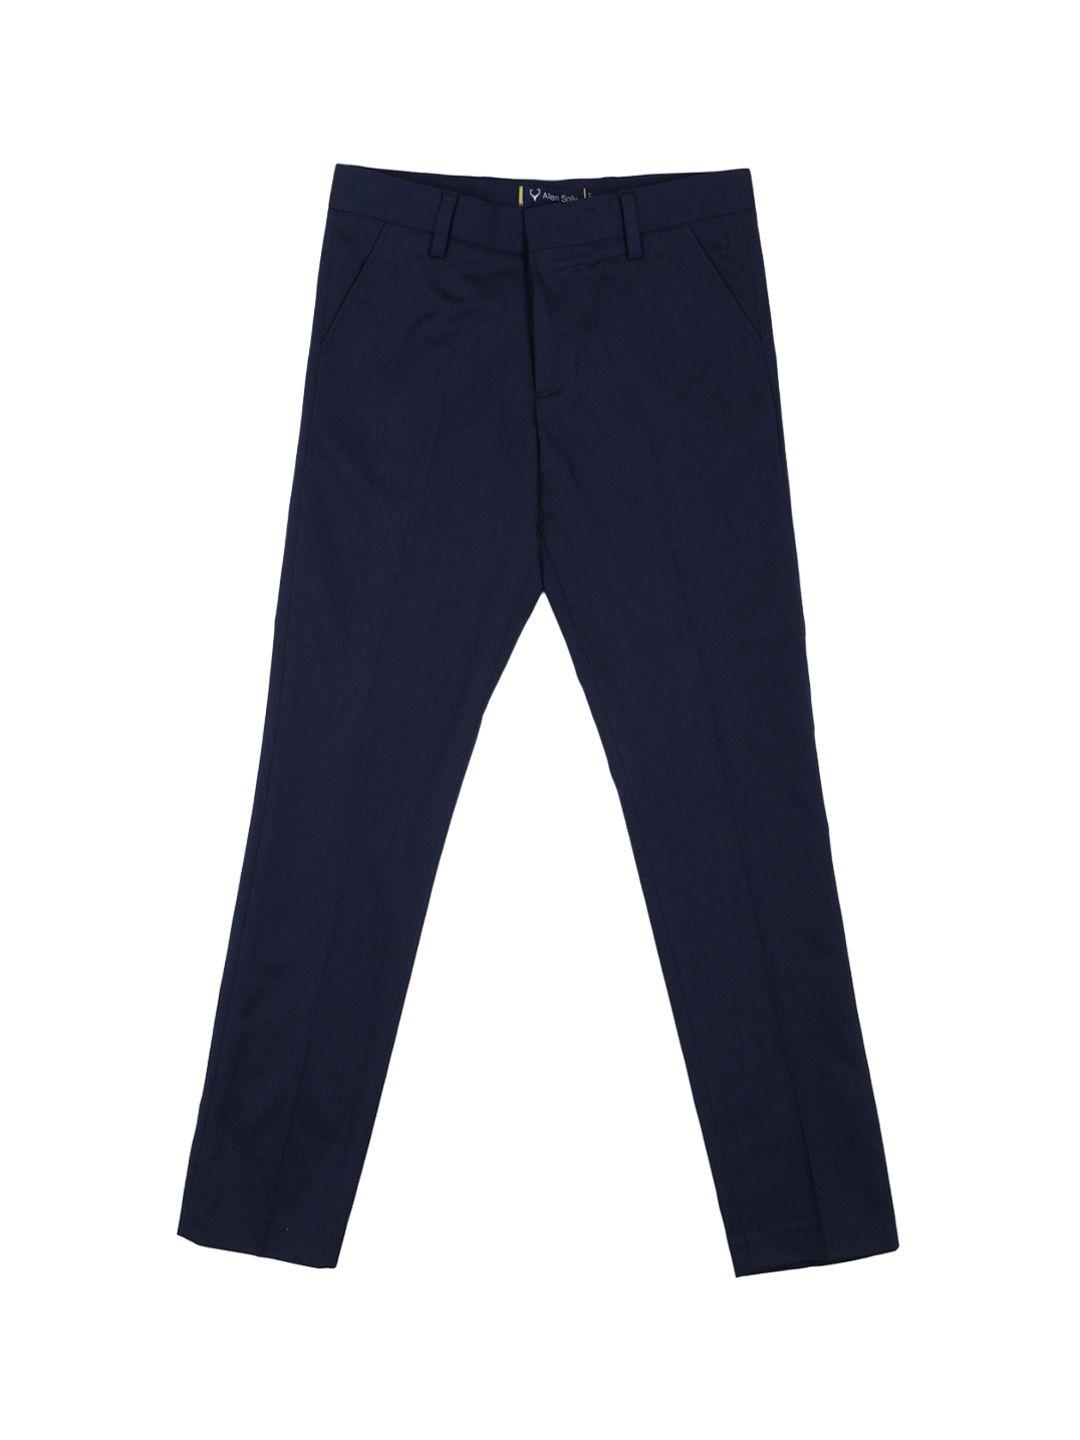 allen solly junior boys navy blue slim fit chinos trousers